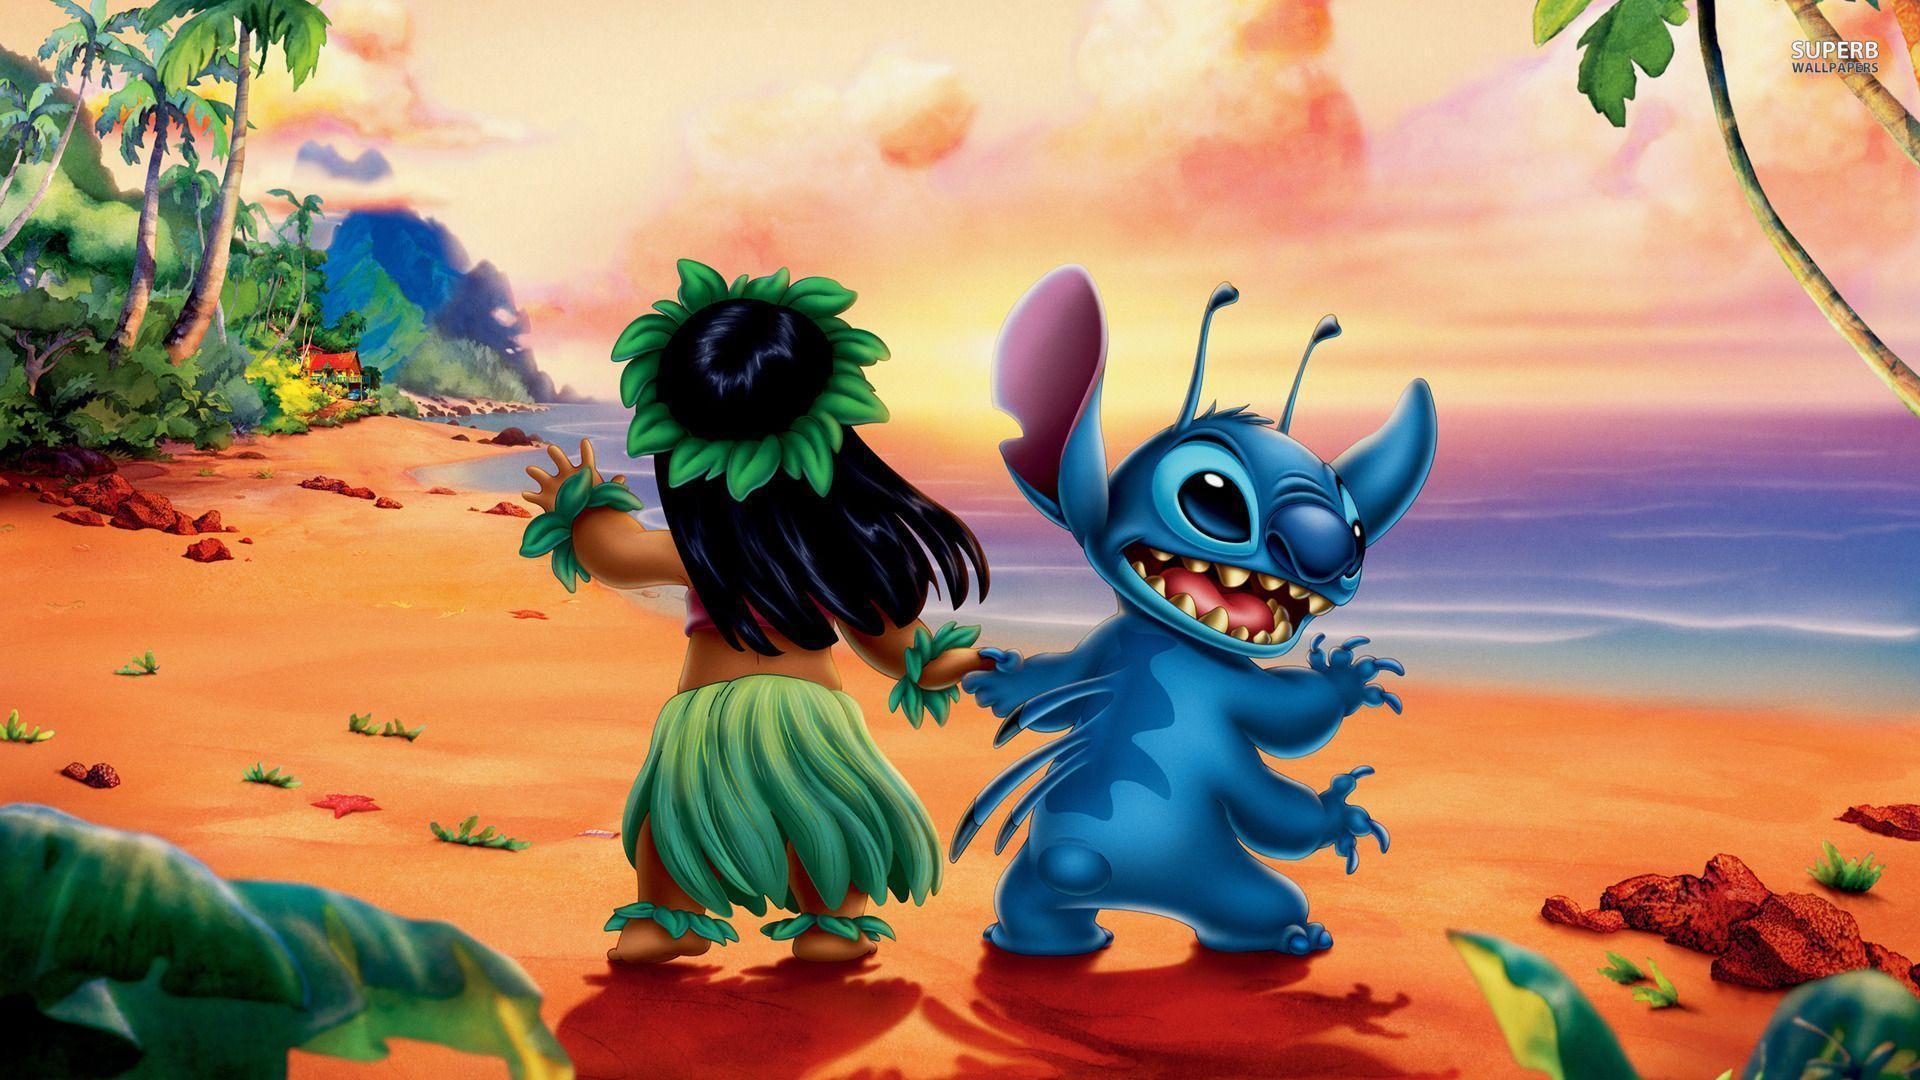 Stunning Lilo And Stitch Desktop Wallpaper image For Free